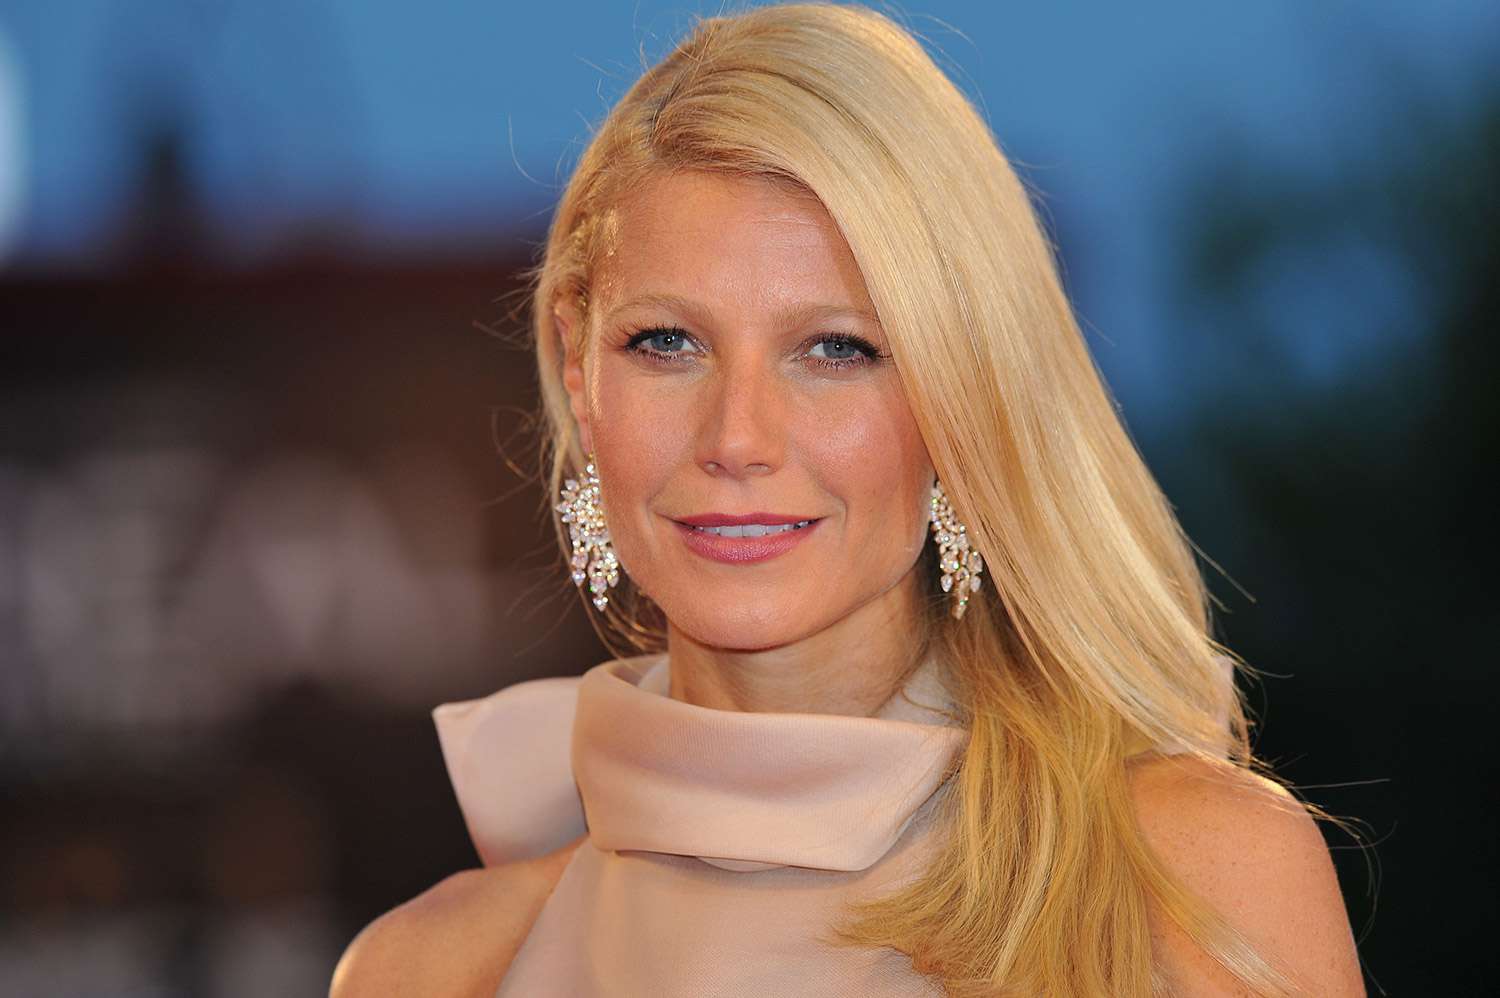 Gwyneth Paltrow Has Had 'Barely Any Alcohol' This Year as She Prioritizes Health After Having COVID